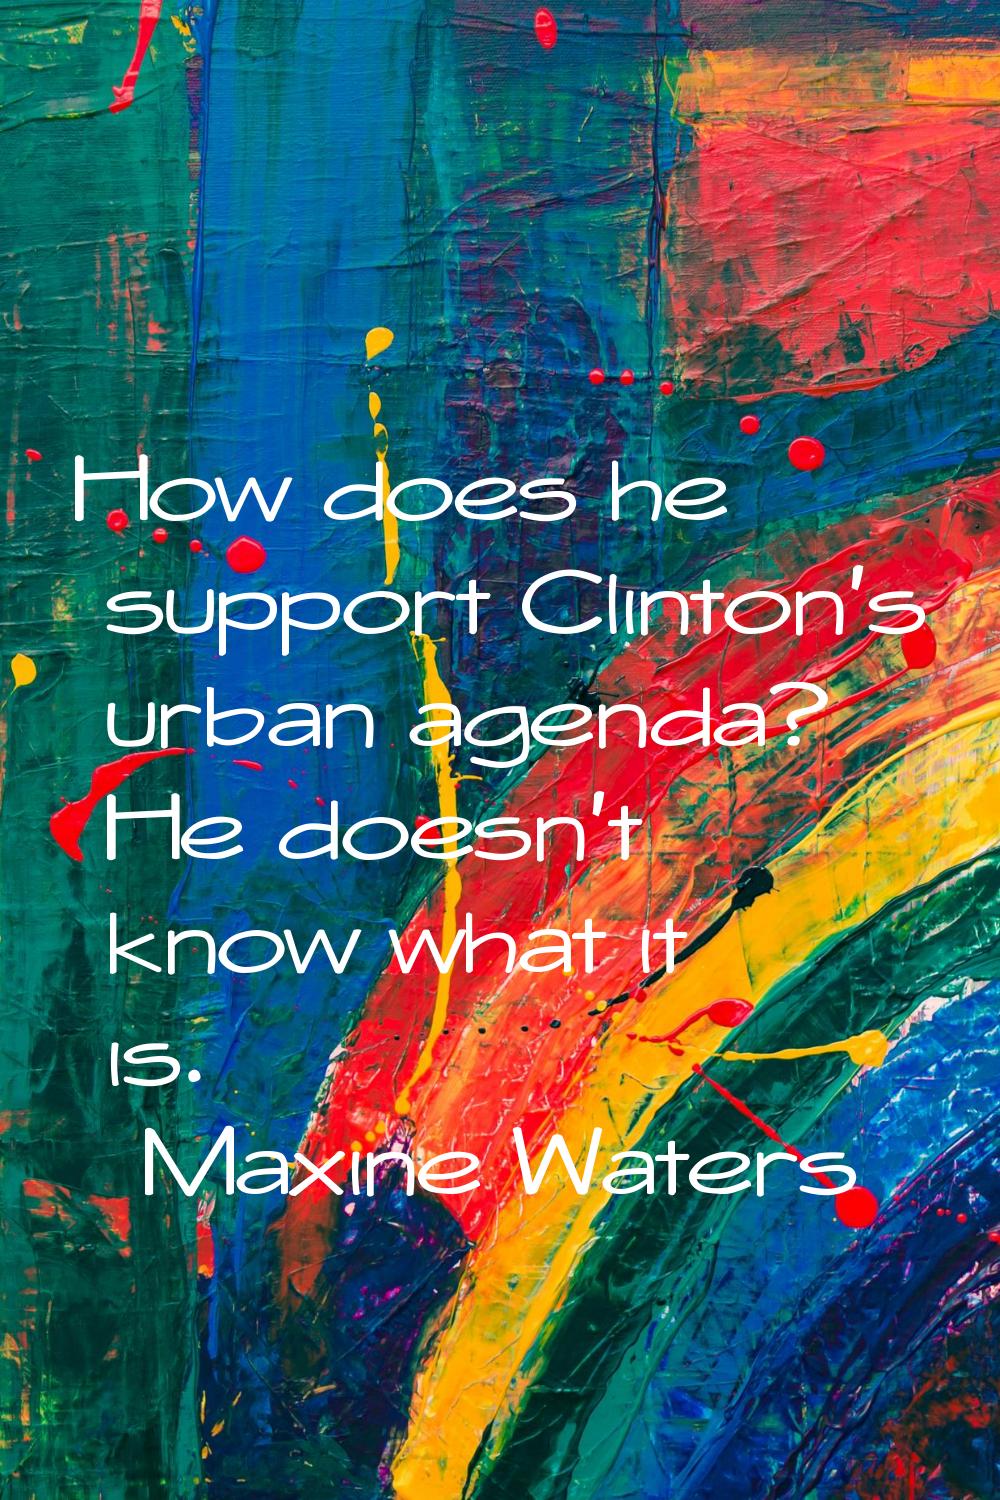 How does he support Clinton's urban agenda? He doesn't know what it is.